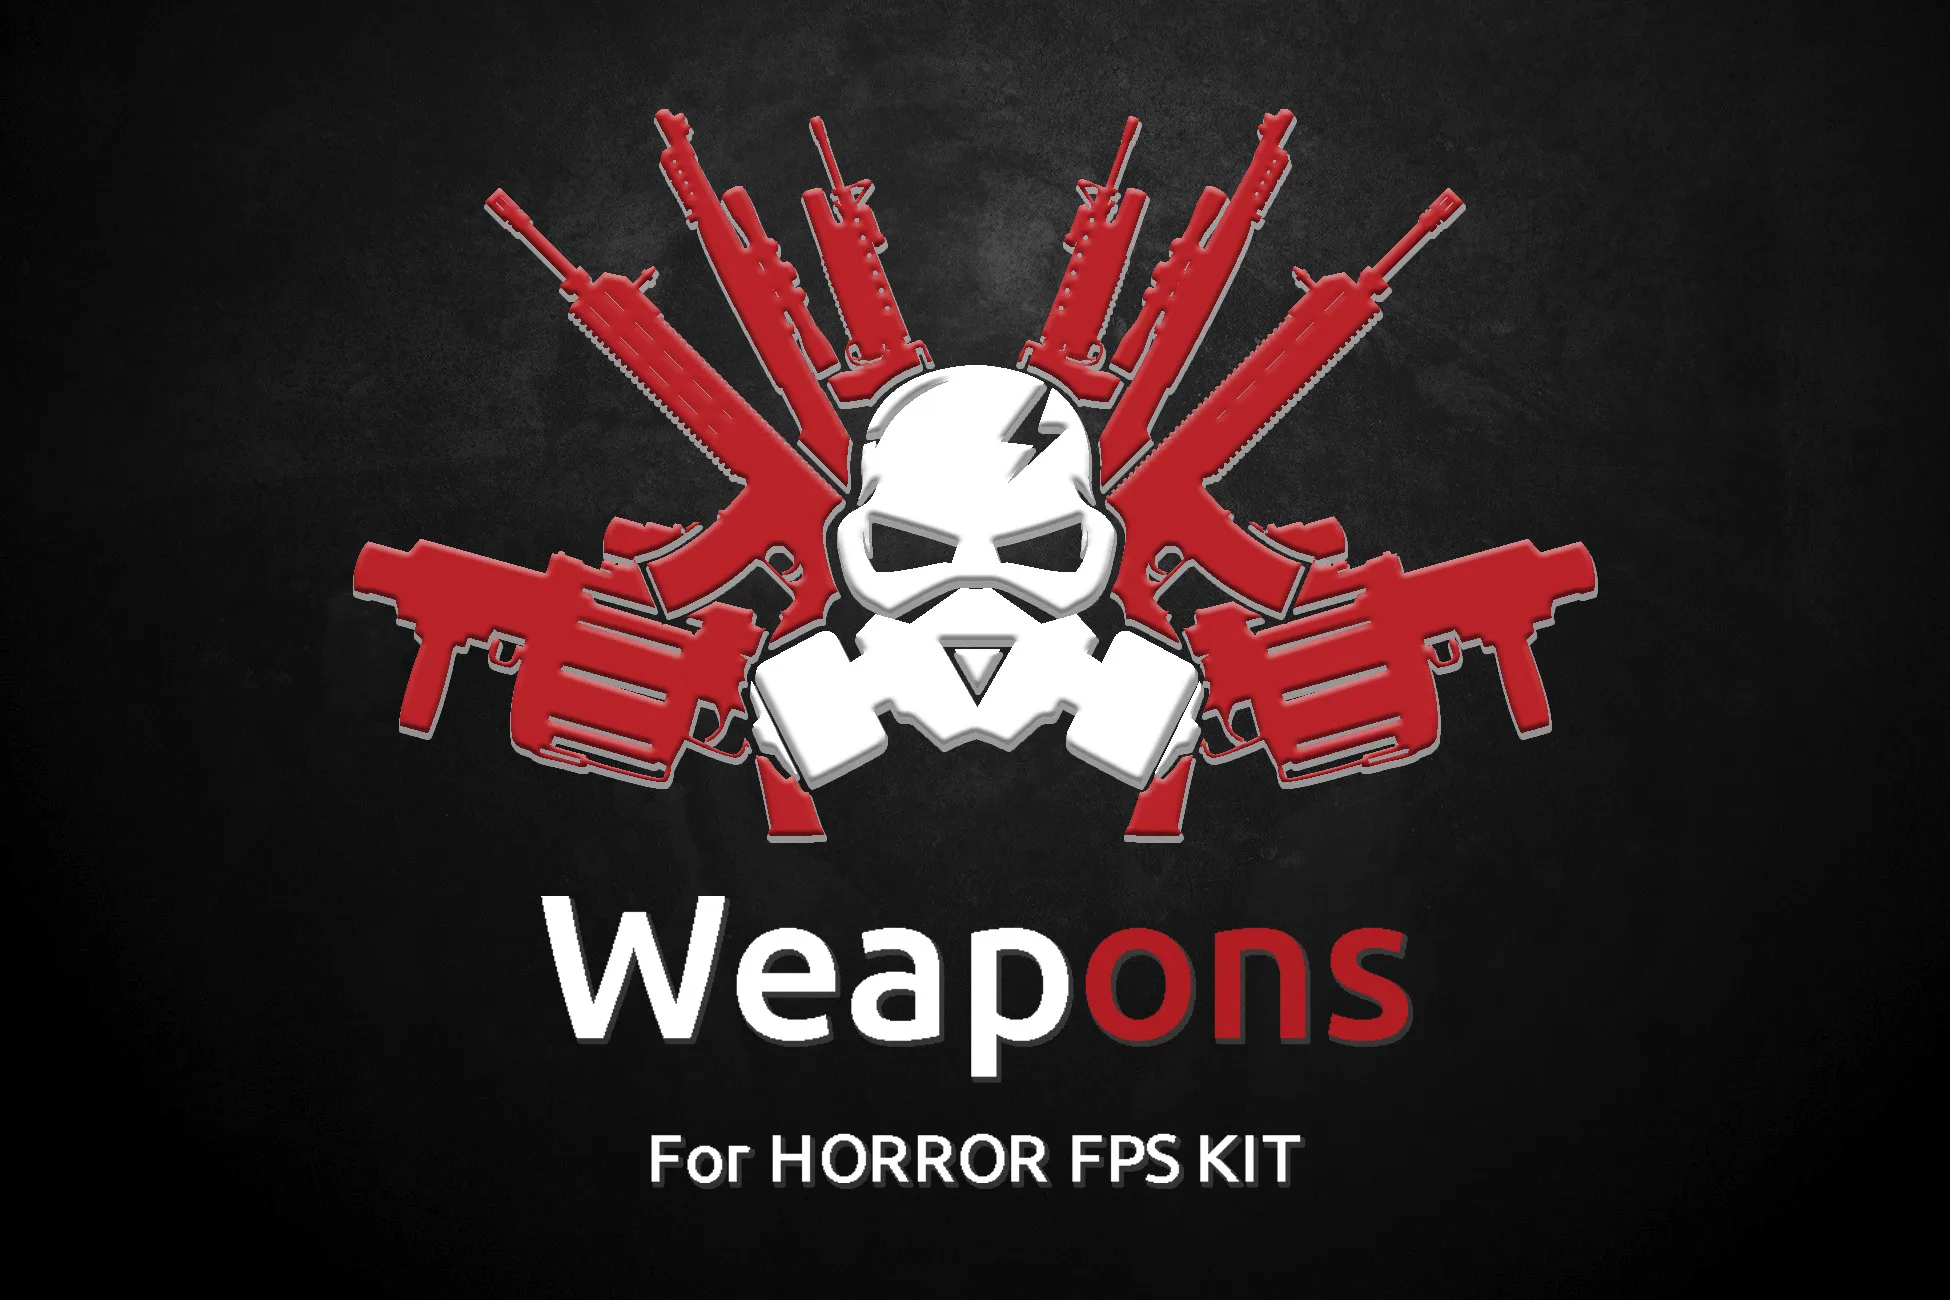 Weapons v0.1.5 Release